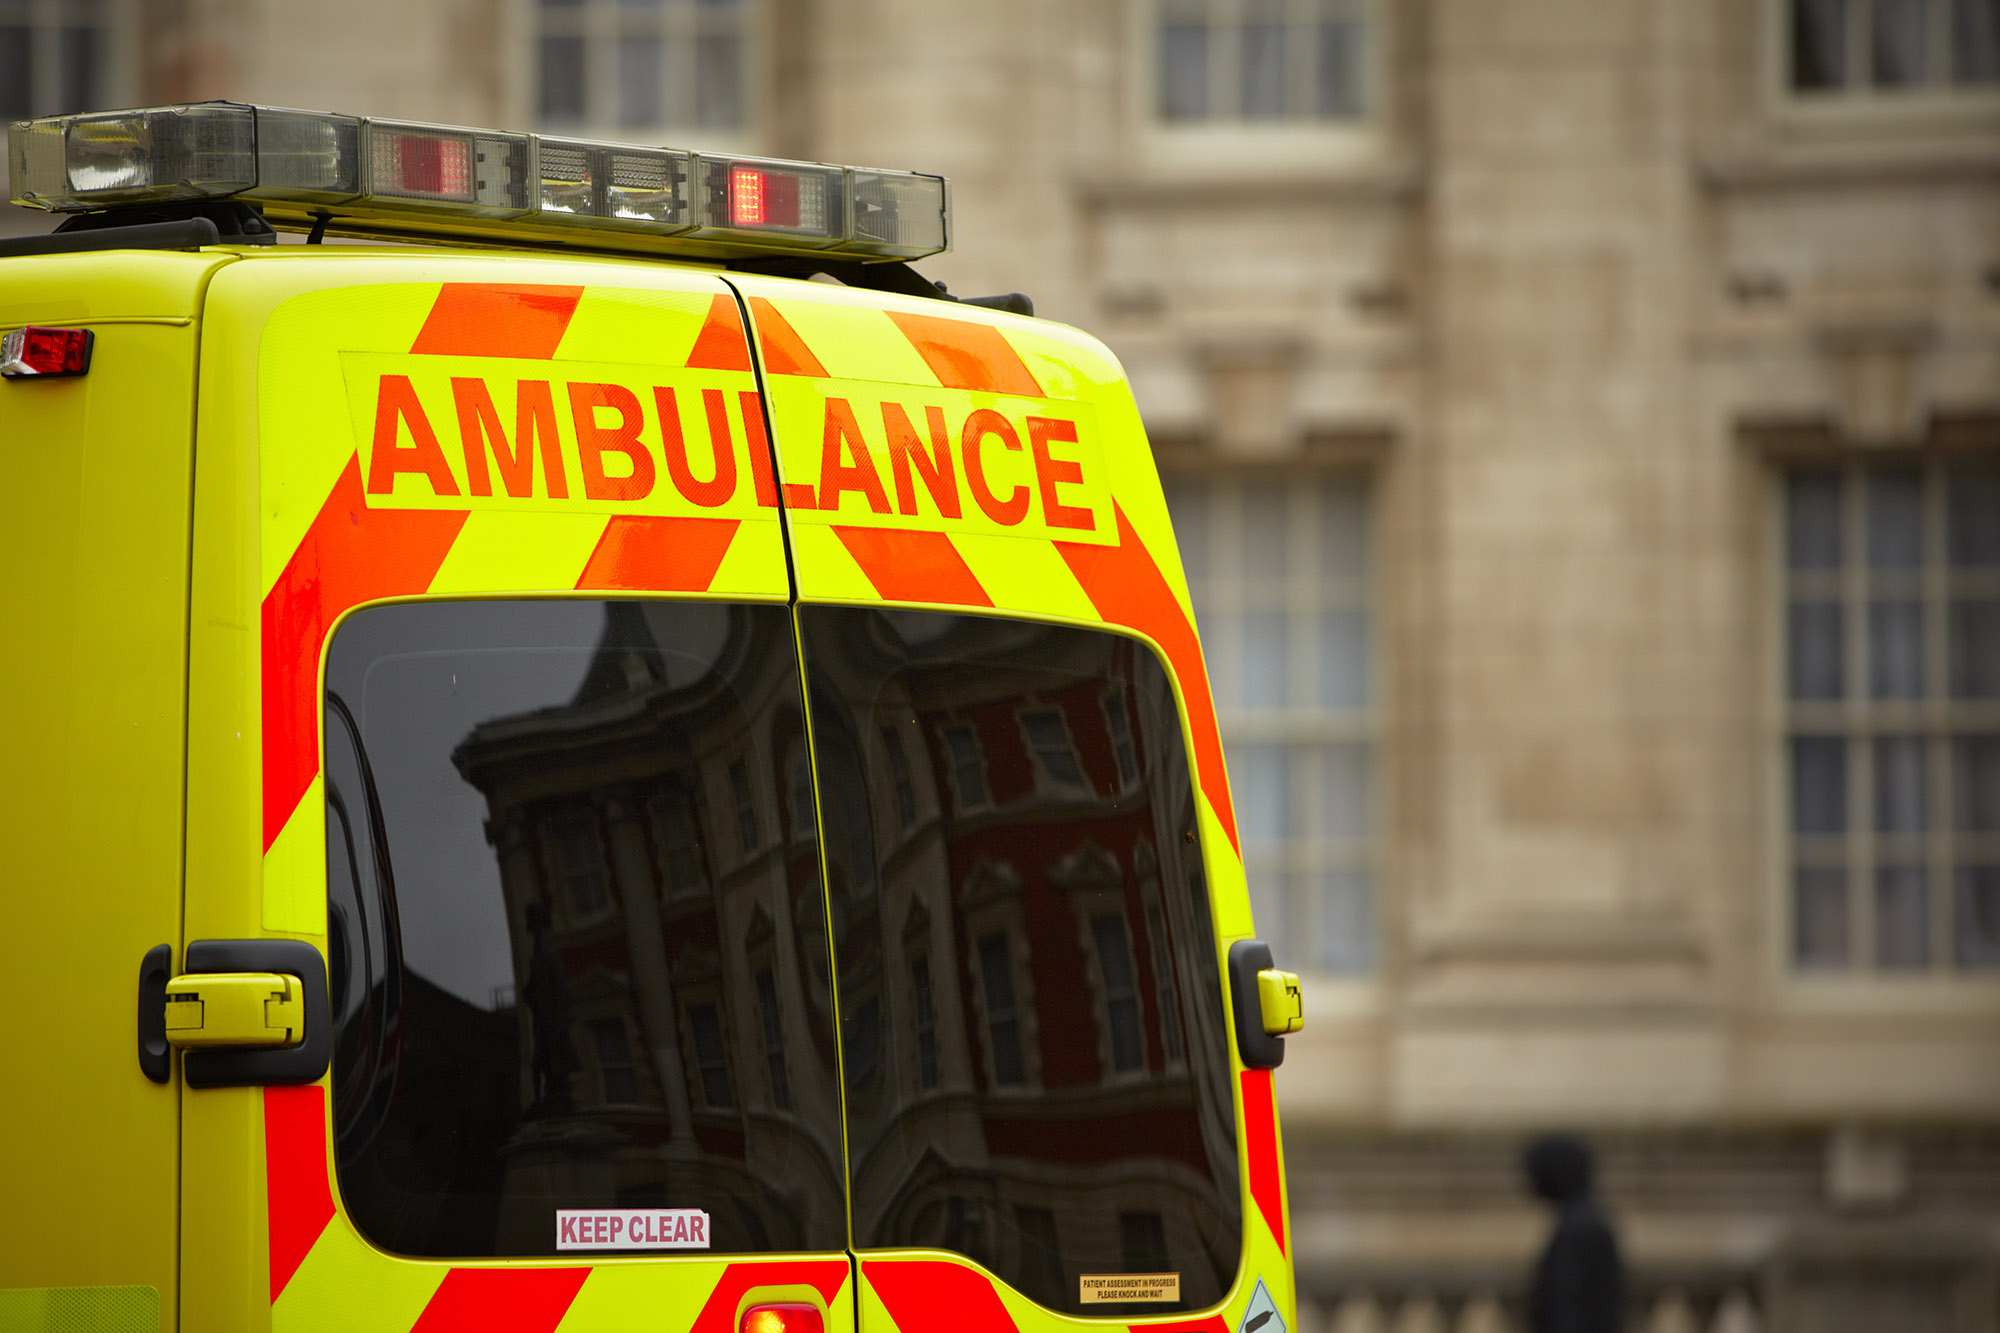 Ambulance, personal injury solicitors, accident claim managers Bradford